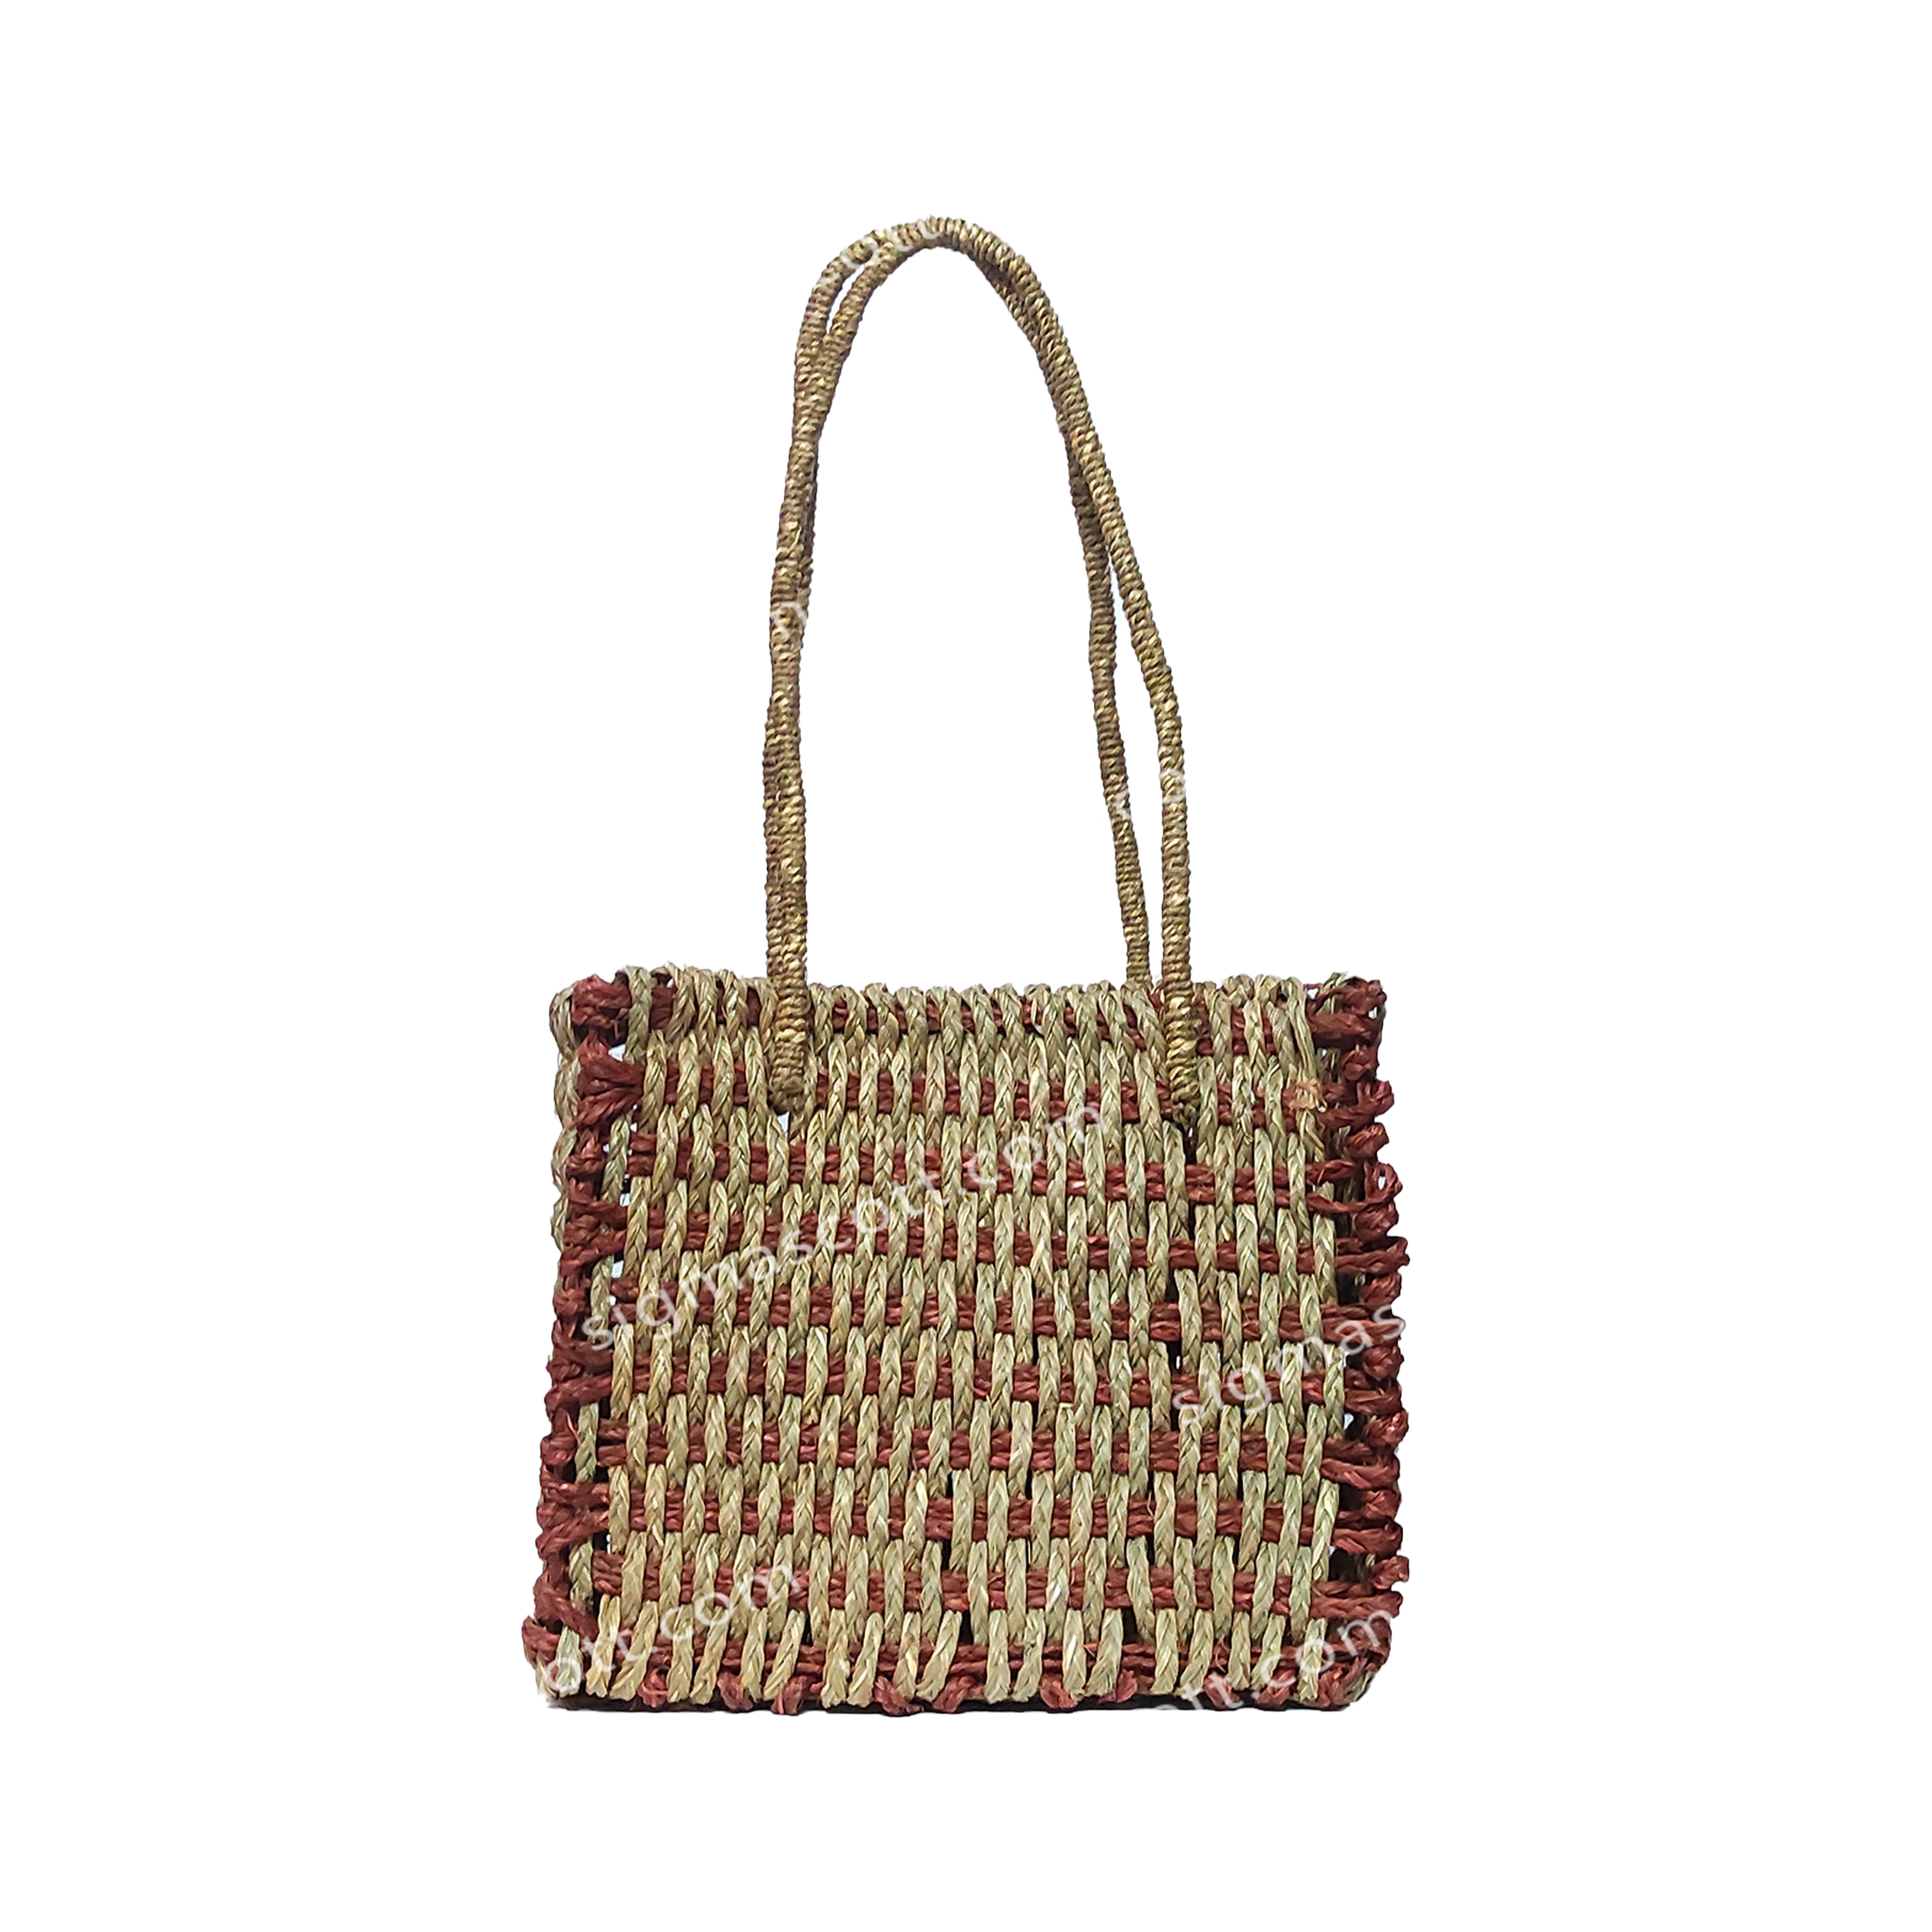 Ethnic Handicrafts Traditional Bags at best price in Jaipur